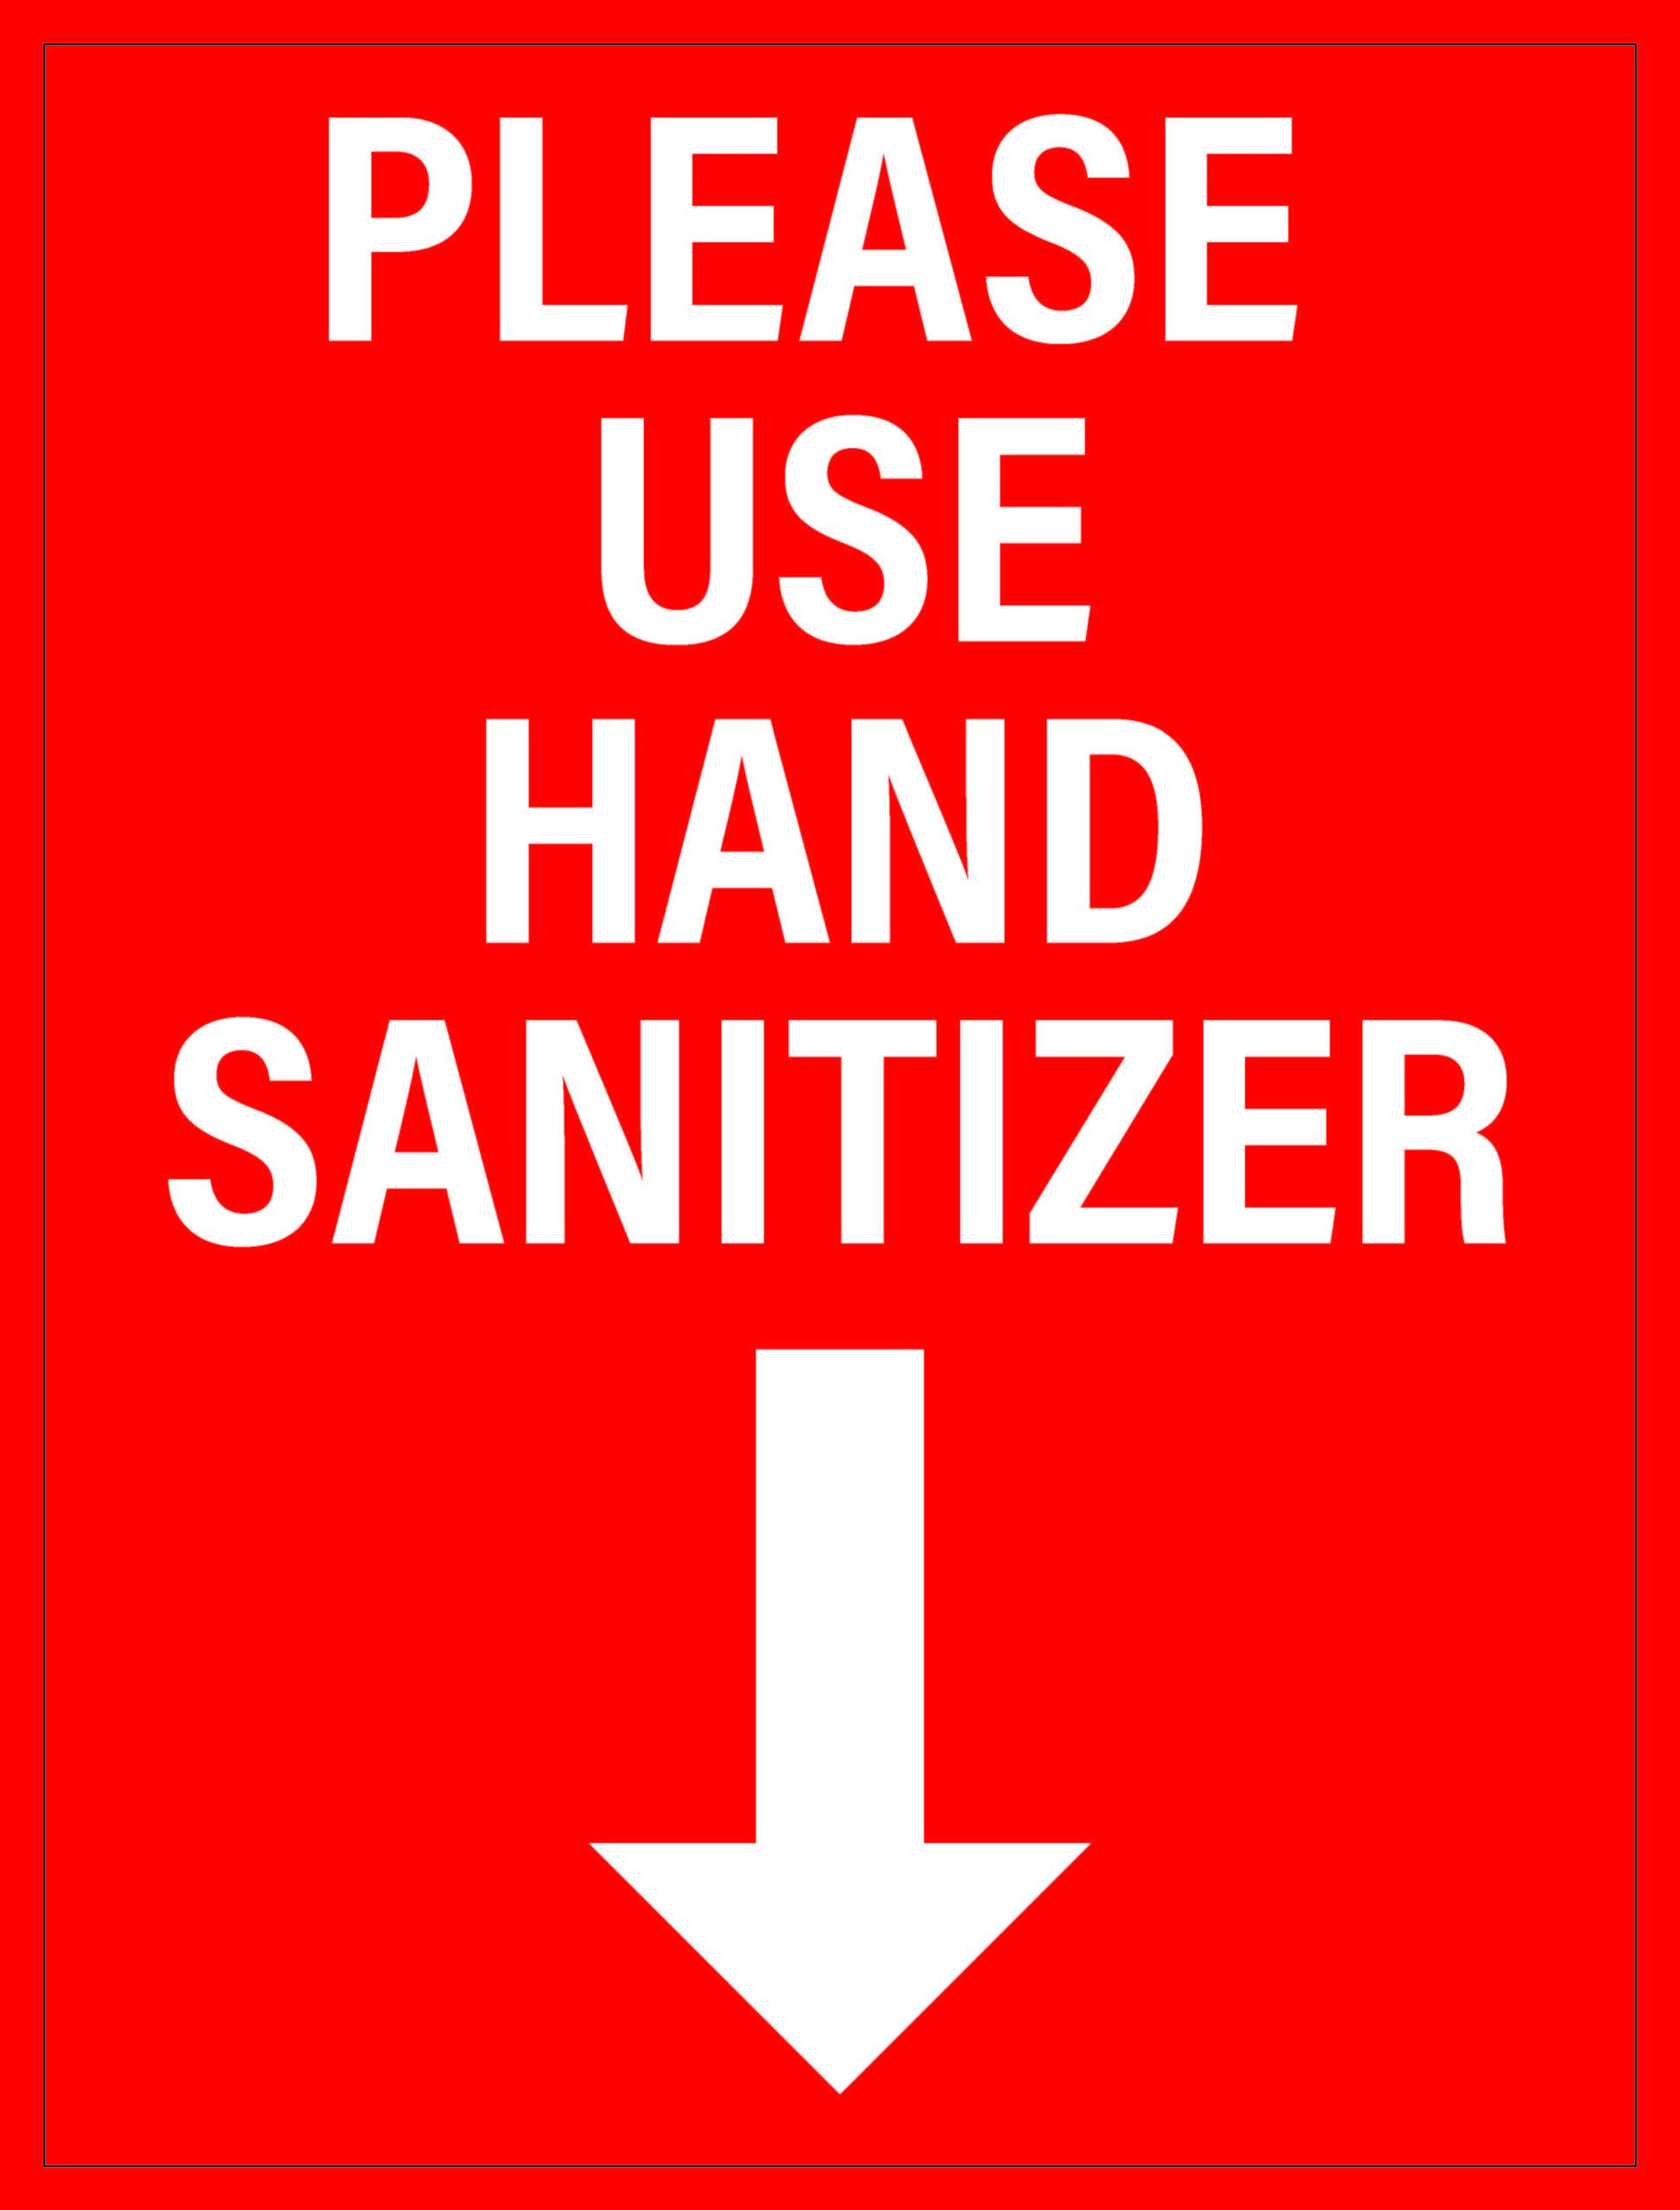 Sanitizer Stand Signs 18x24"